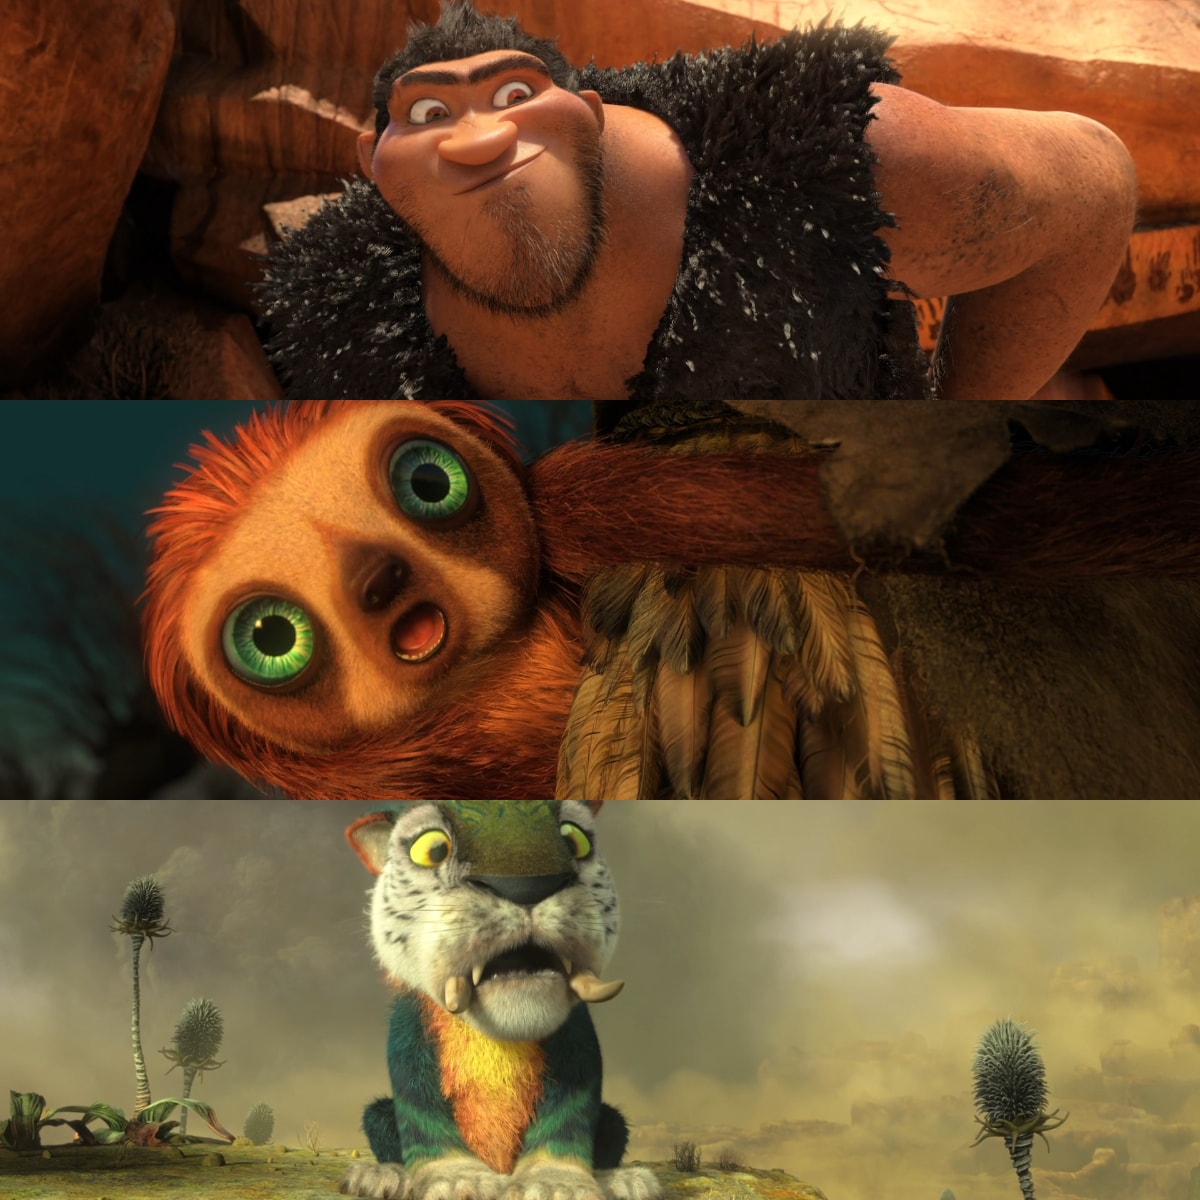 1200px x 1200px - The Croods 2 Movie Download In Hindi Pmdg 737 Ngx Dll Crack podcast